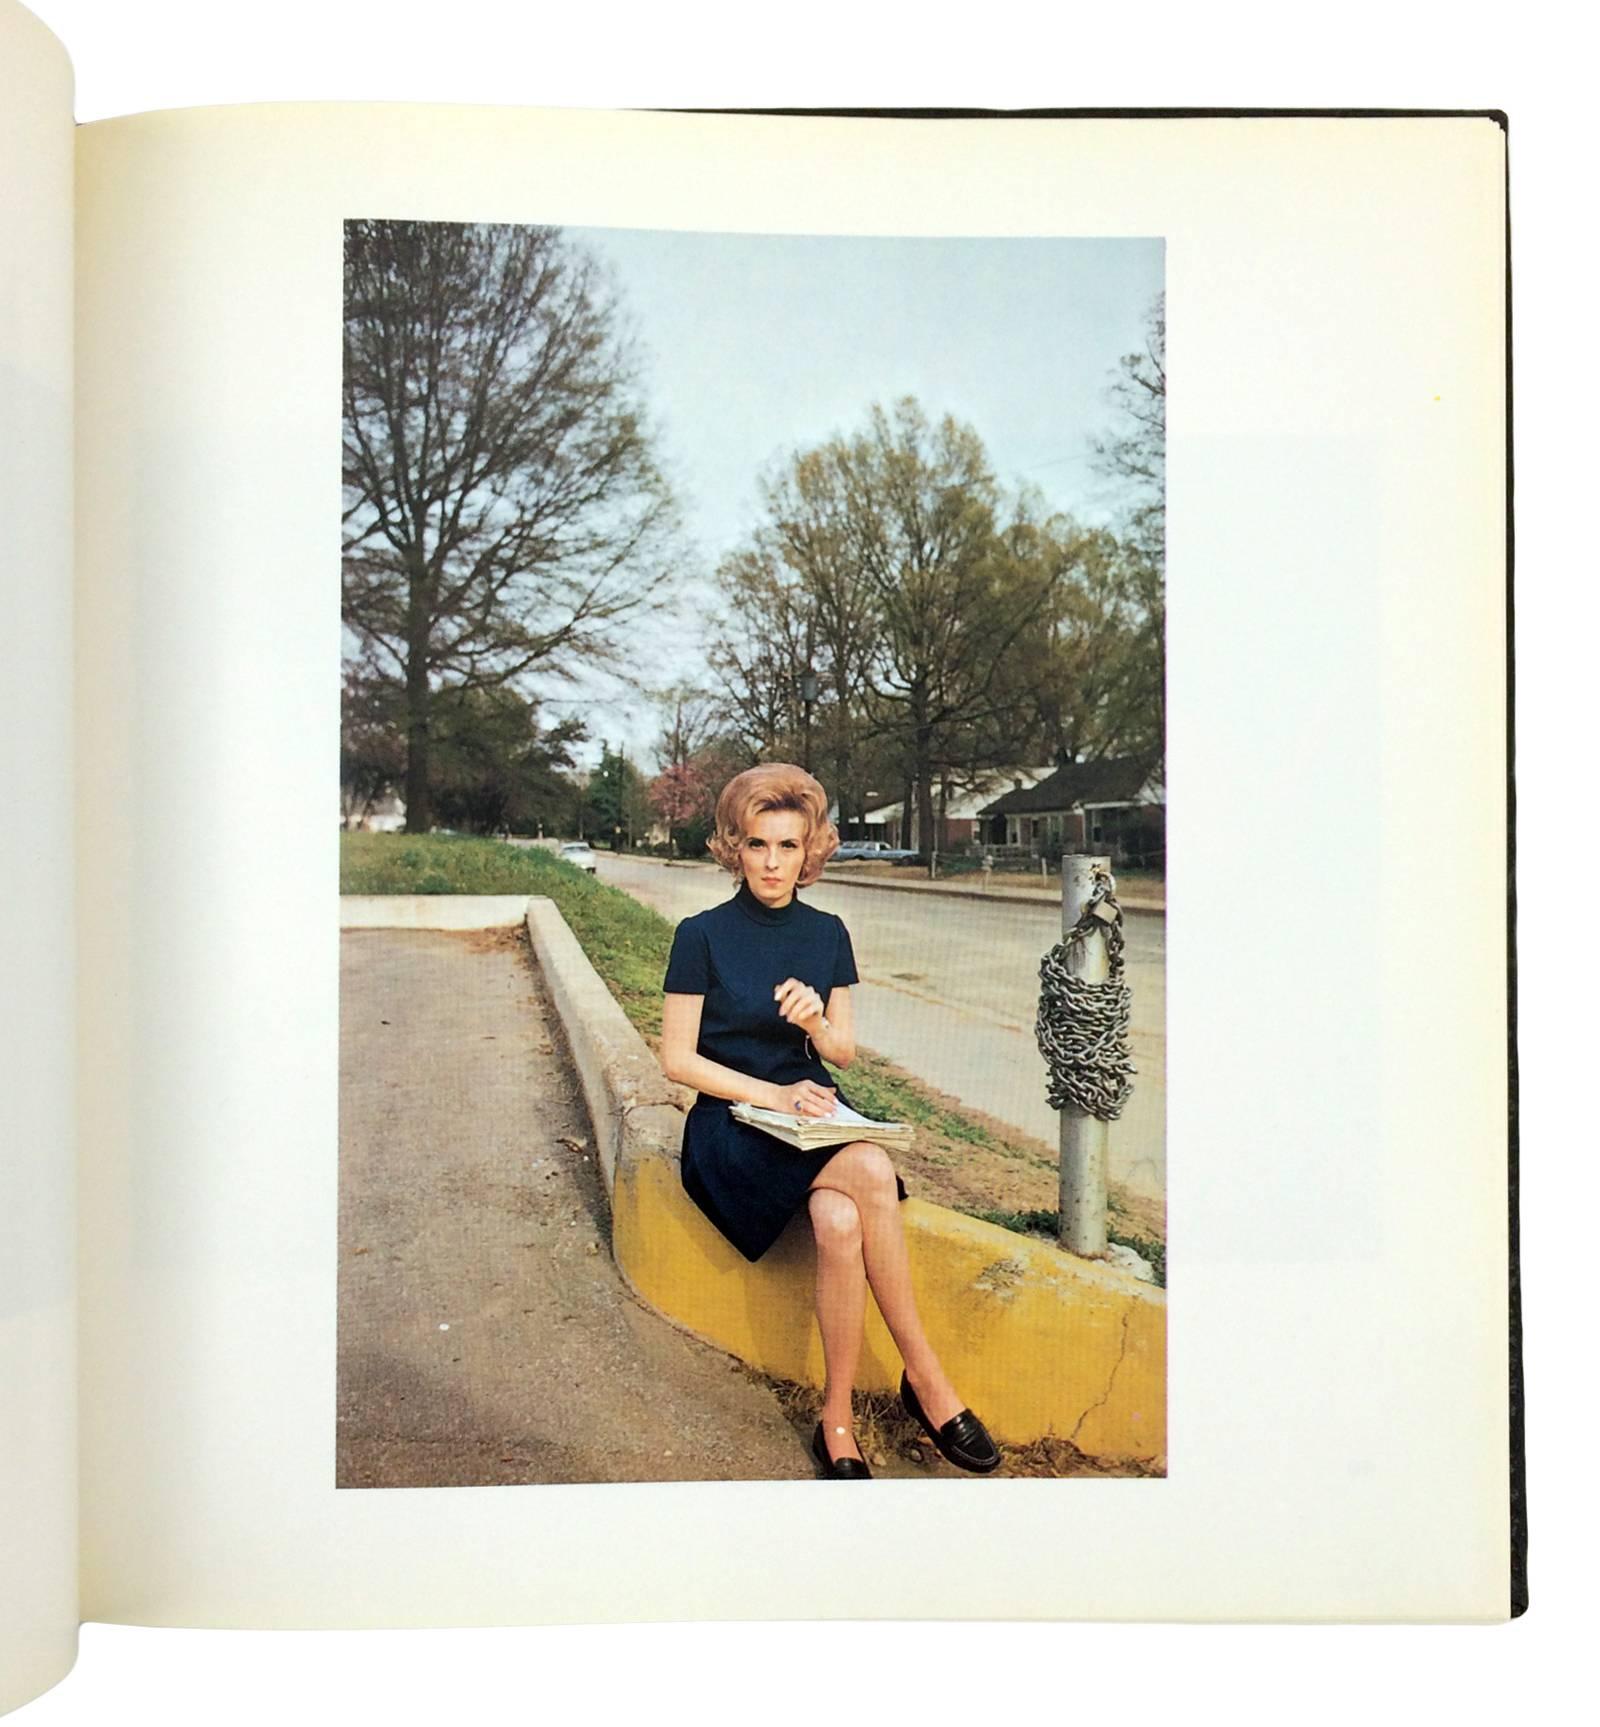 Szarkowski, John. William Eggleston's Guide. 110 pp. with many color plates. 4to, cloth. New York, Museum of Modern Art, 1976.

First edition.